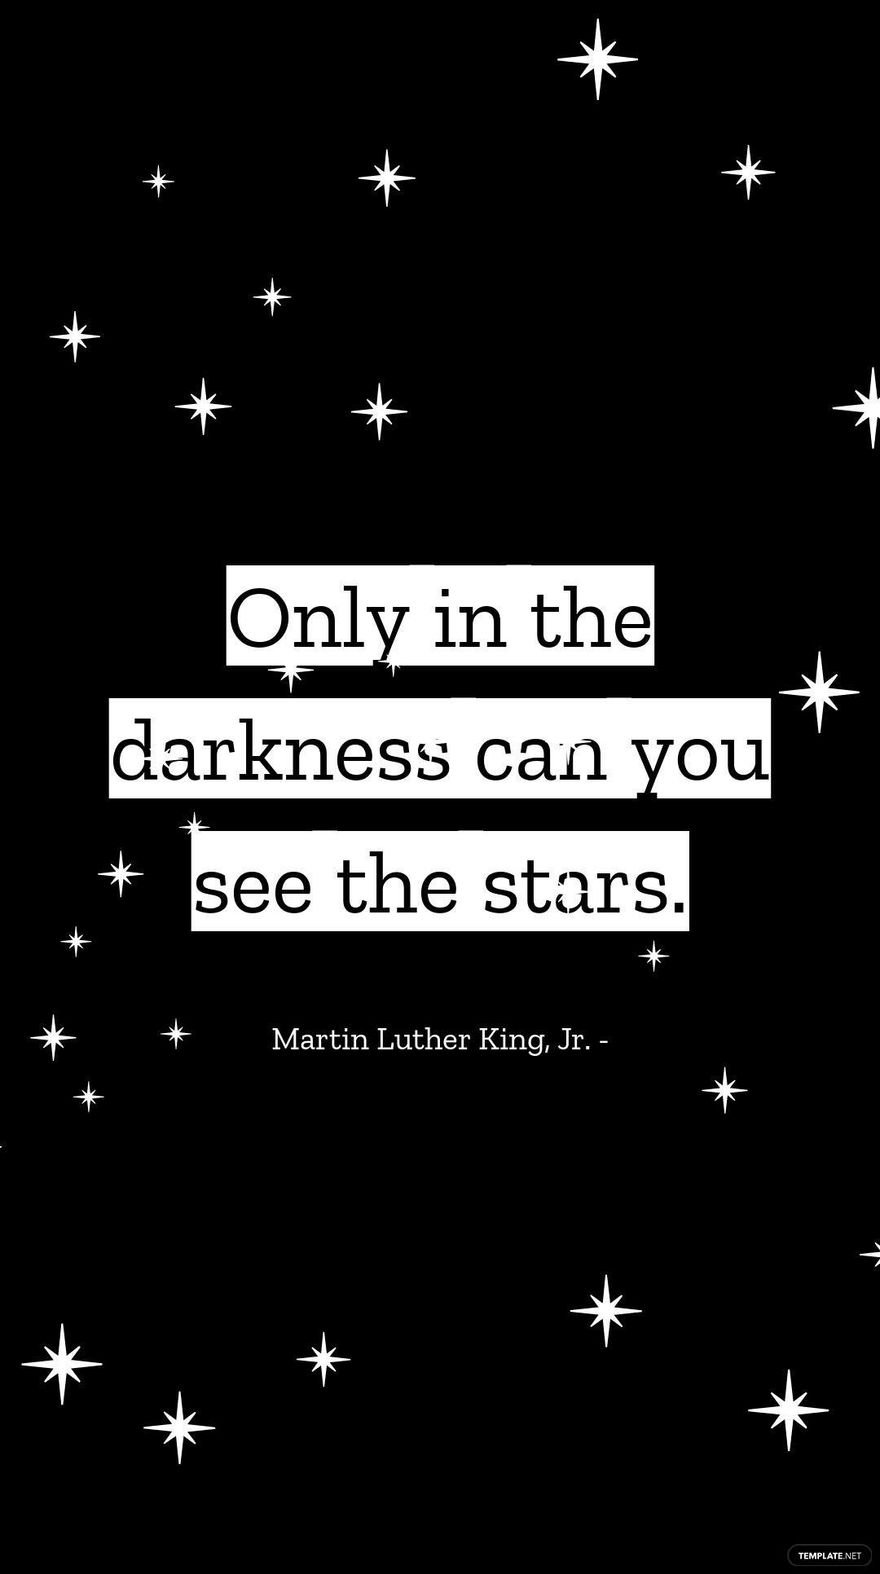 Martin Luther King, Jr. - Only in the darkness can you see the stars.